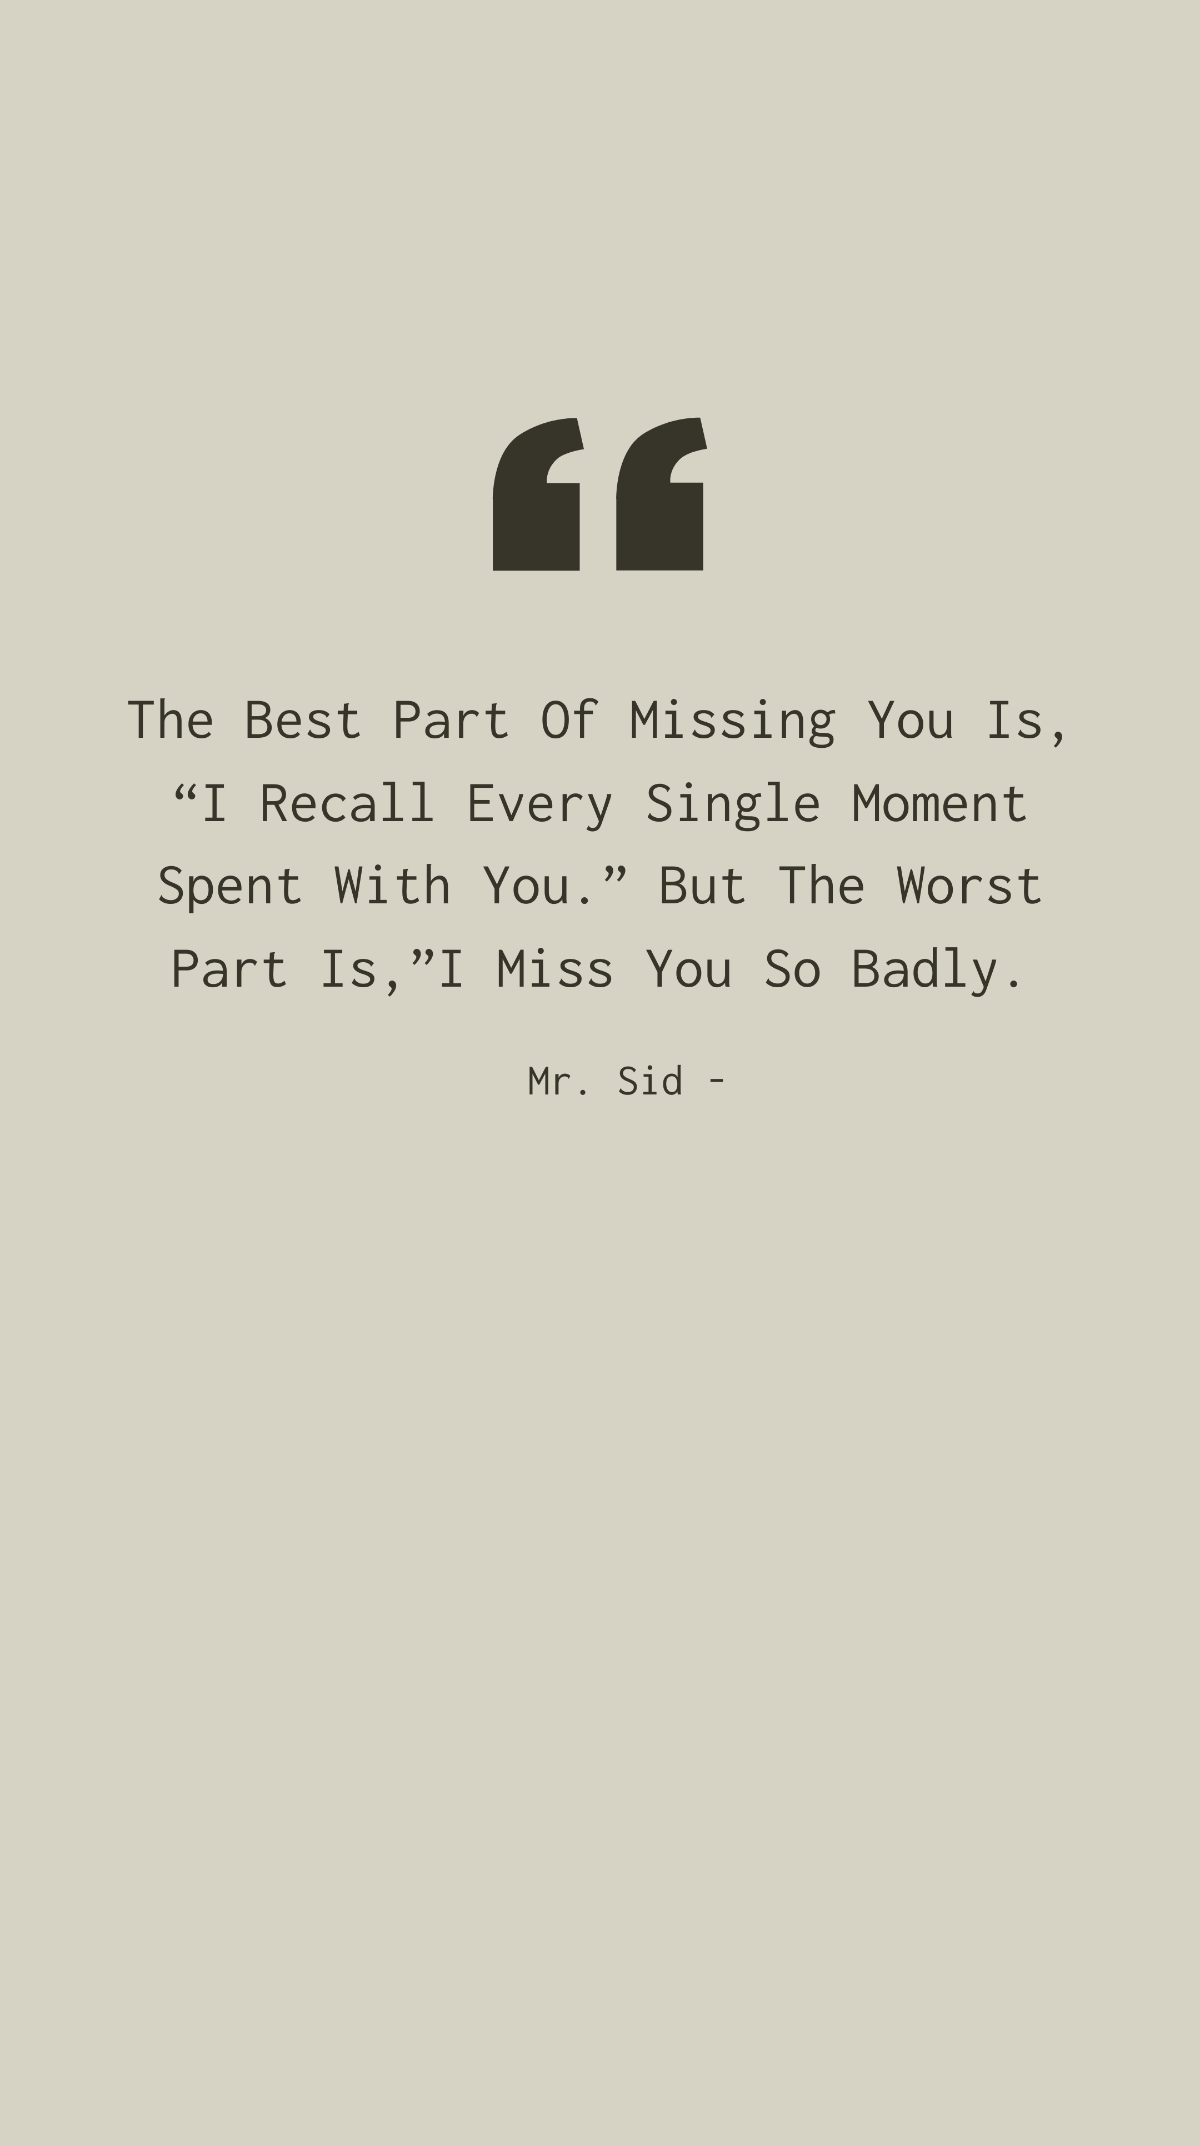 Mr. Sid - The Best Part Of Missing You Is, “I Recall Every Single Moment Spent With You.” But The Worst Part Is,”I Miss You So Badly.